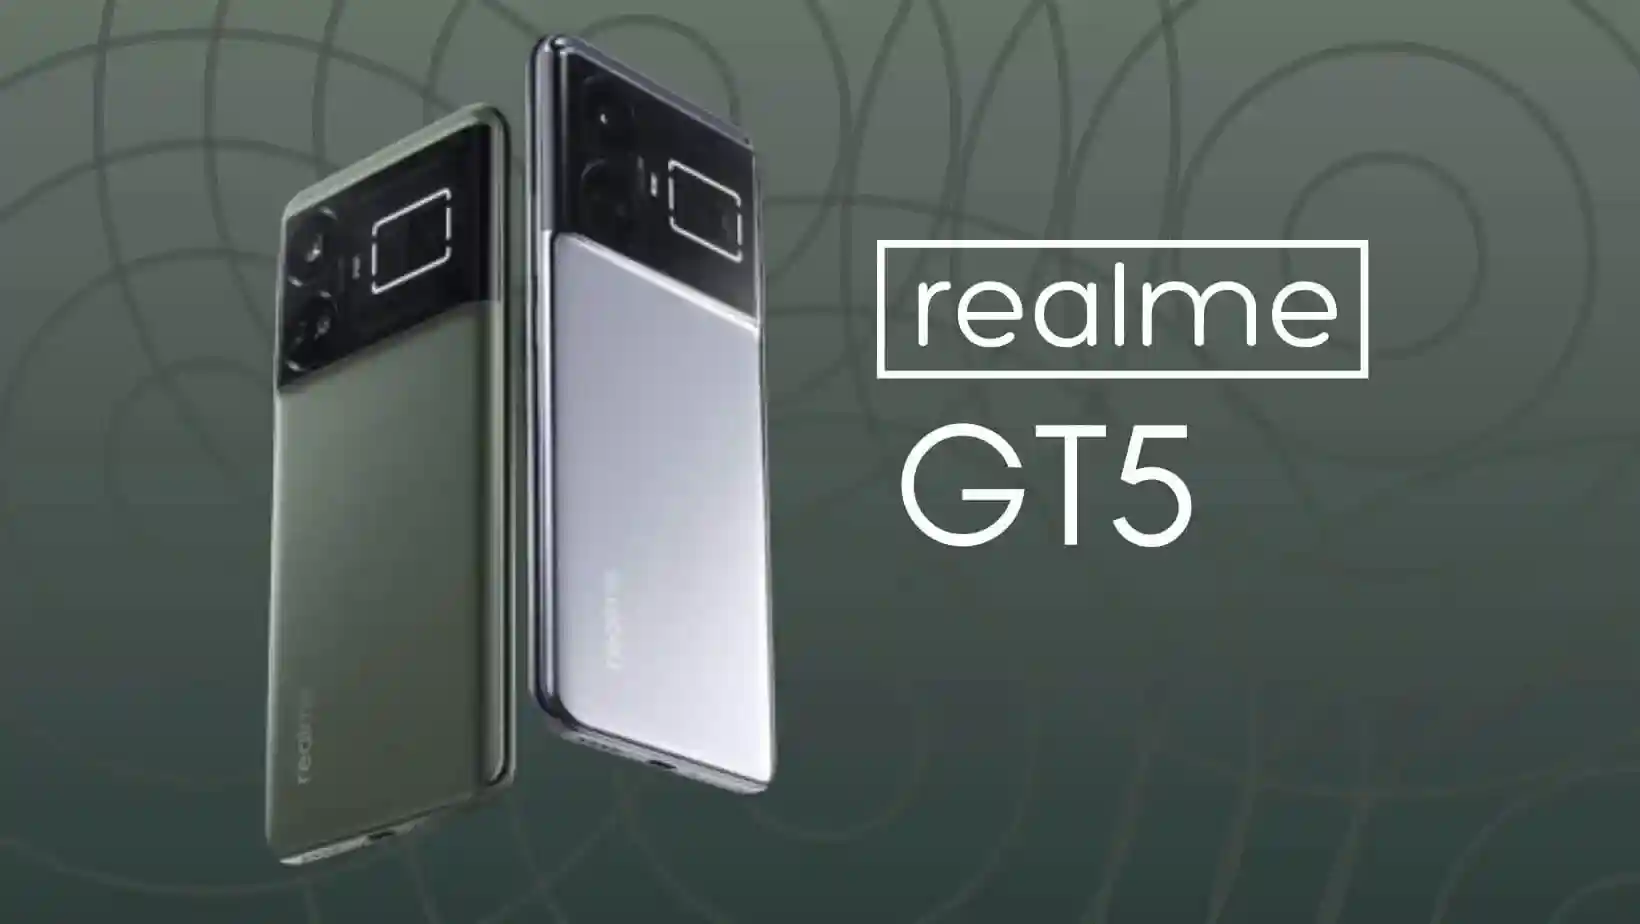 This is about Realme gaming Phone Realme GT5